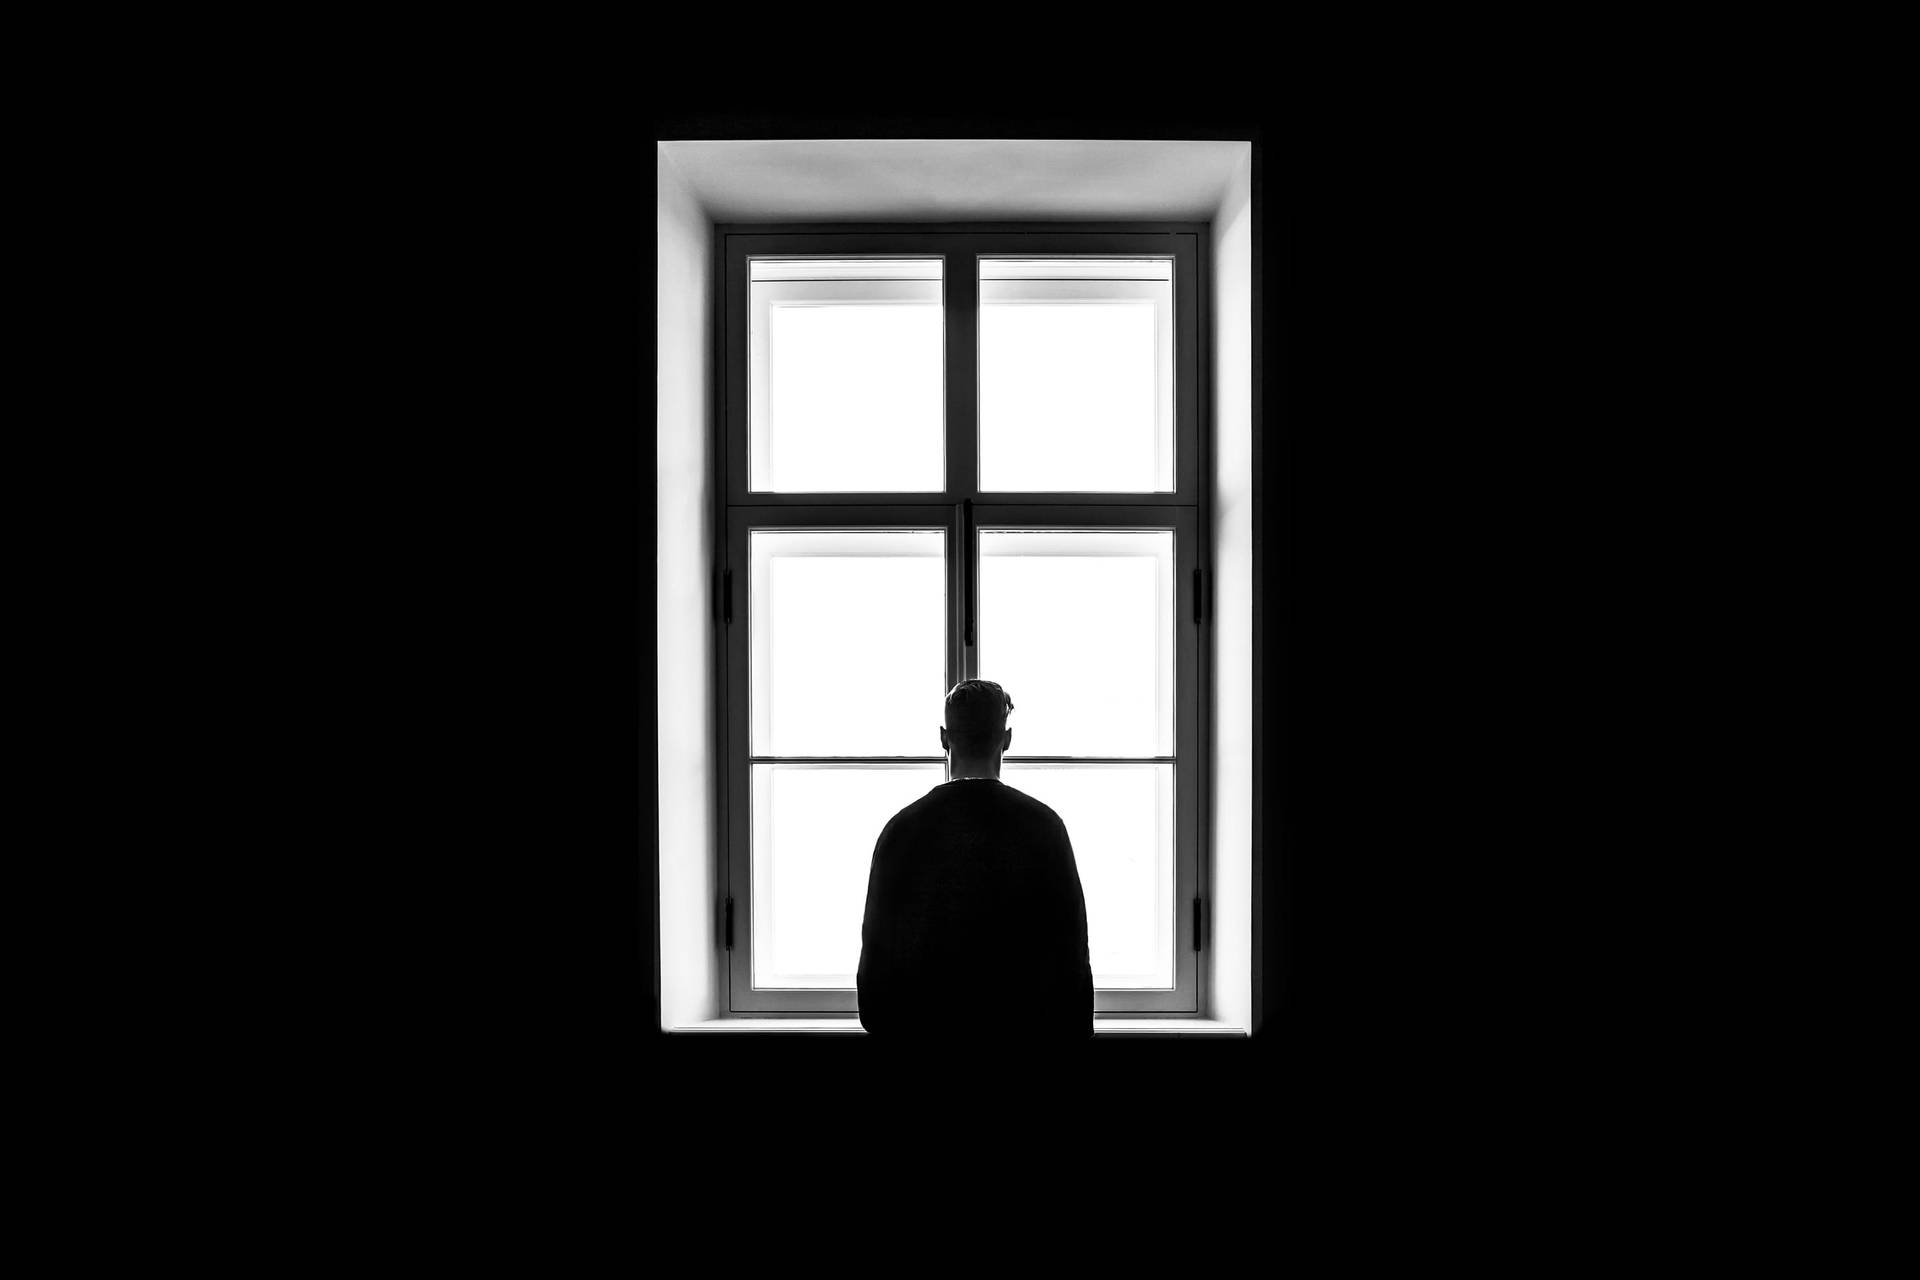 Melancholy Man Gazing Out Of The Window Background